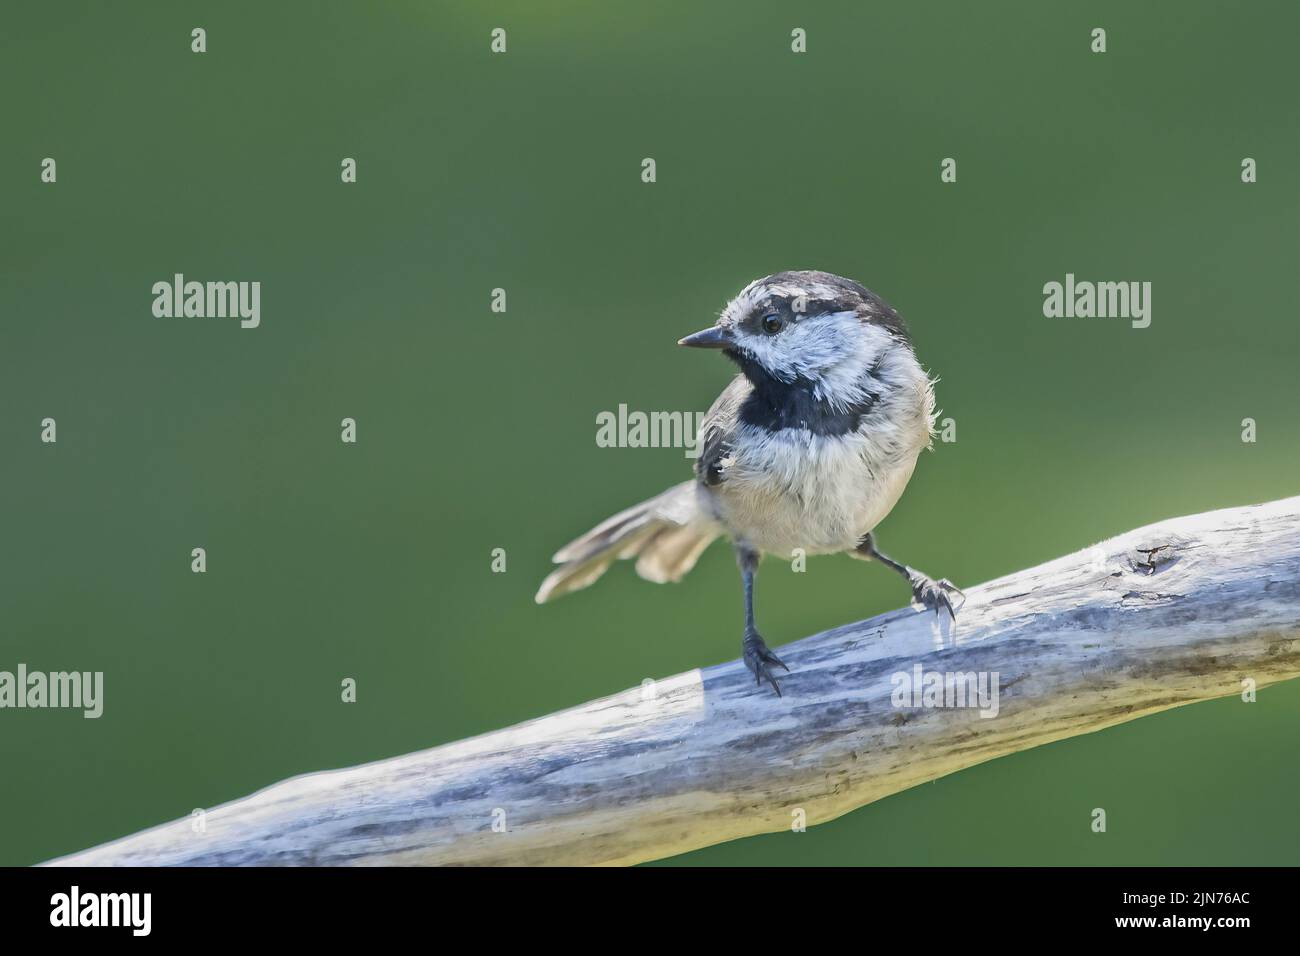 A cute mountain chickadee is perched on a piece of wood in north Idaho. Stock Photo